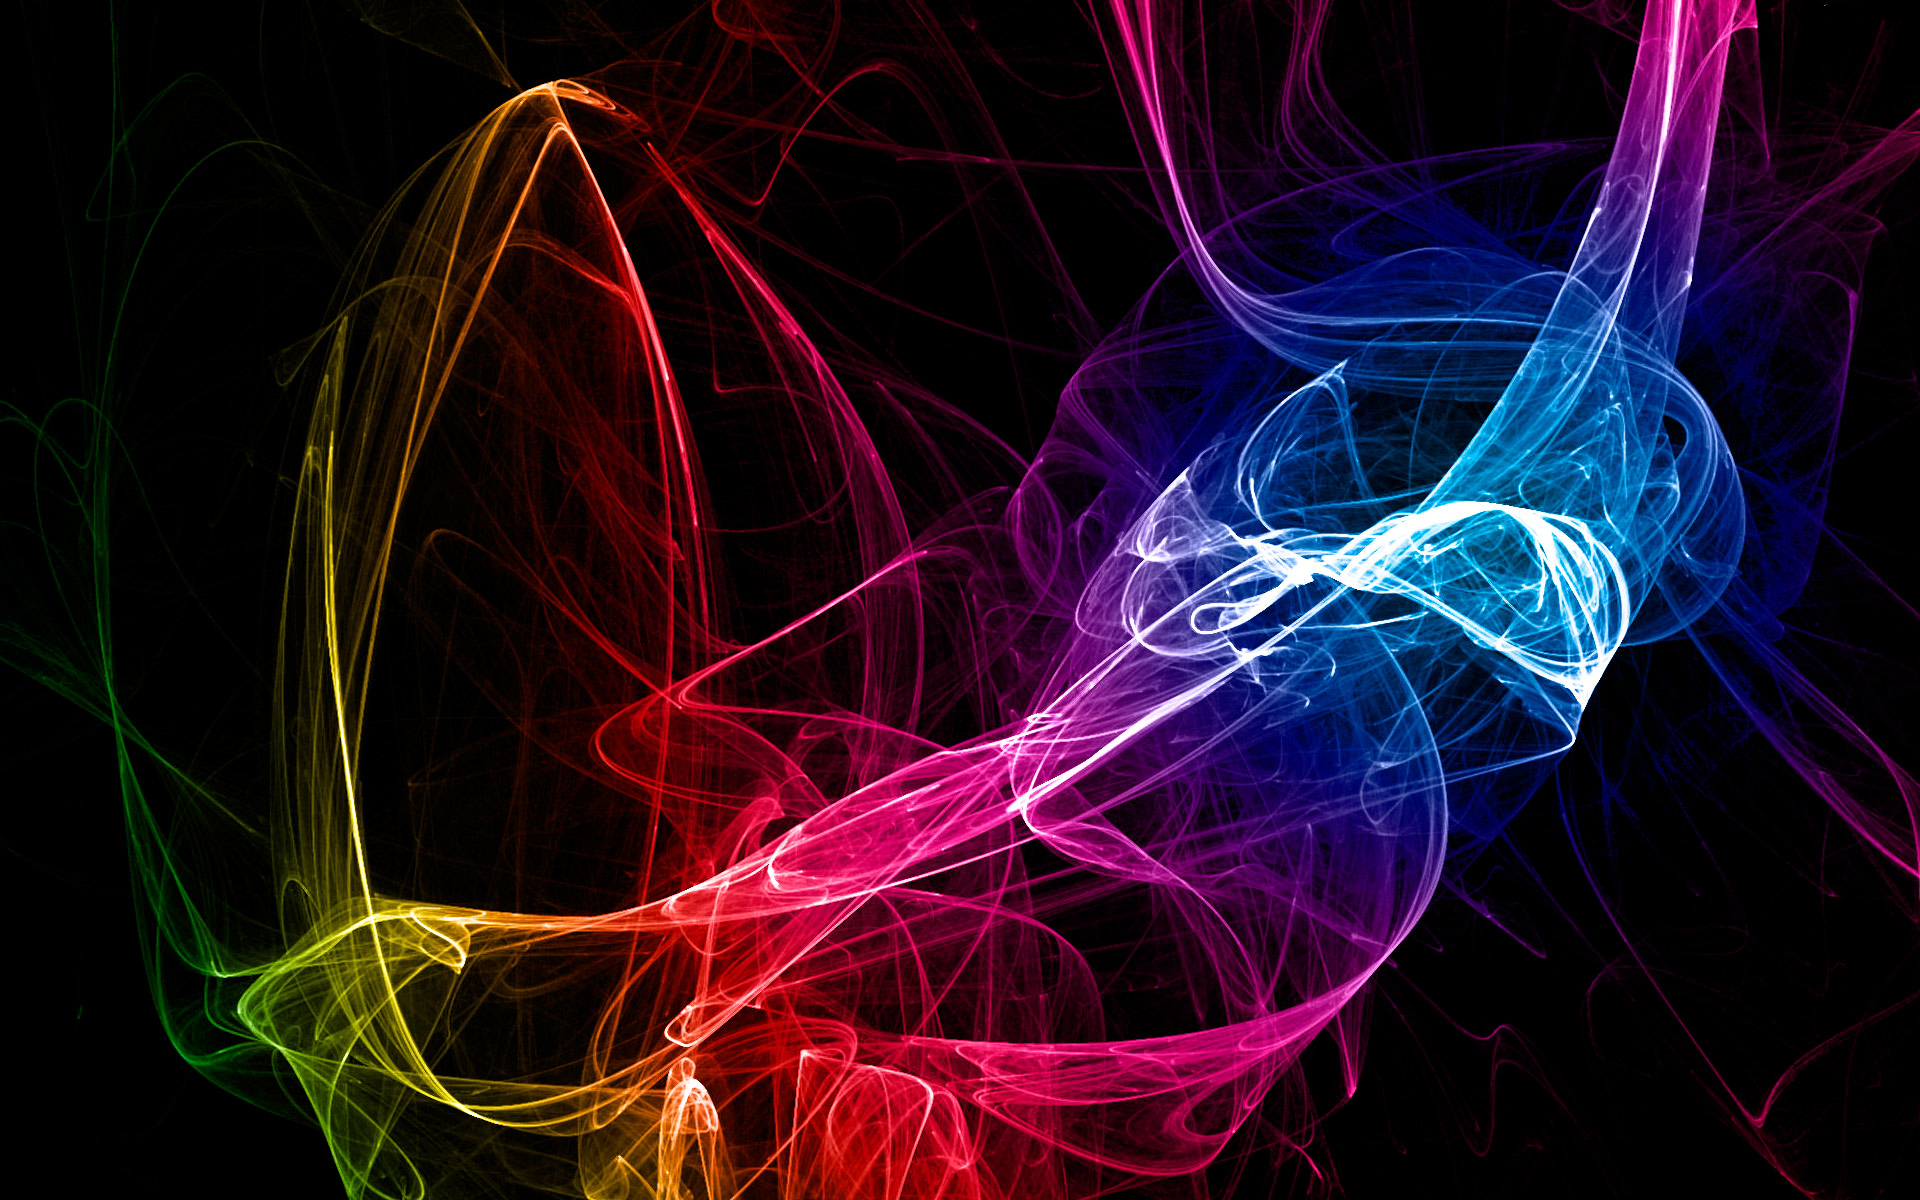 Colorful Hd Backgrounds